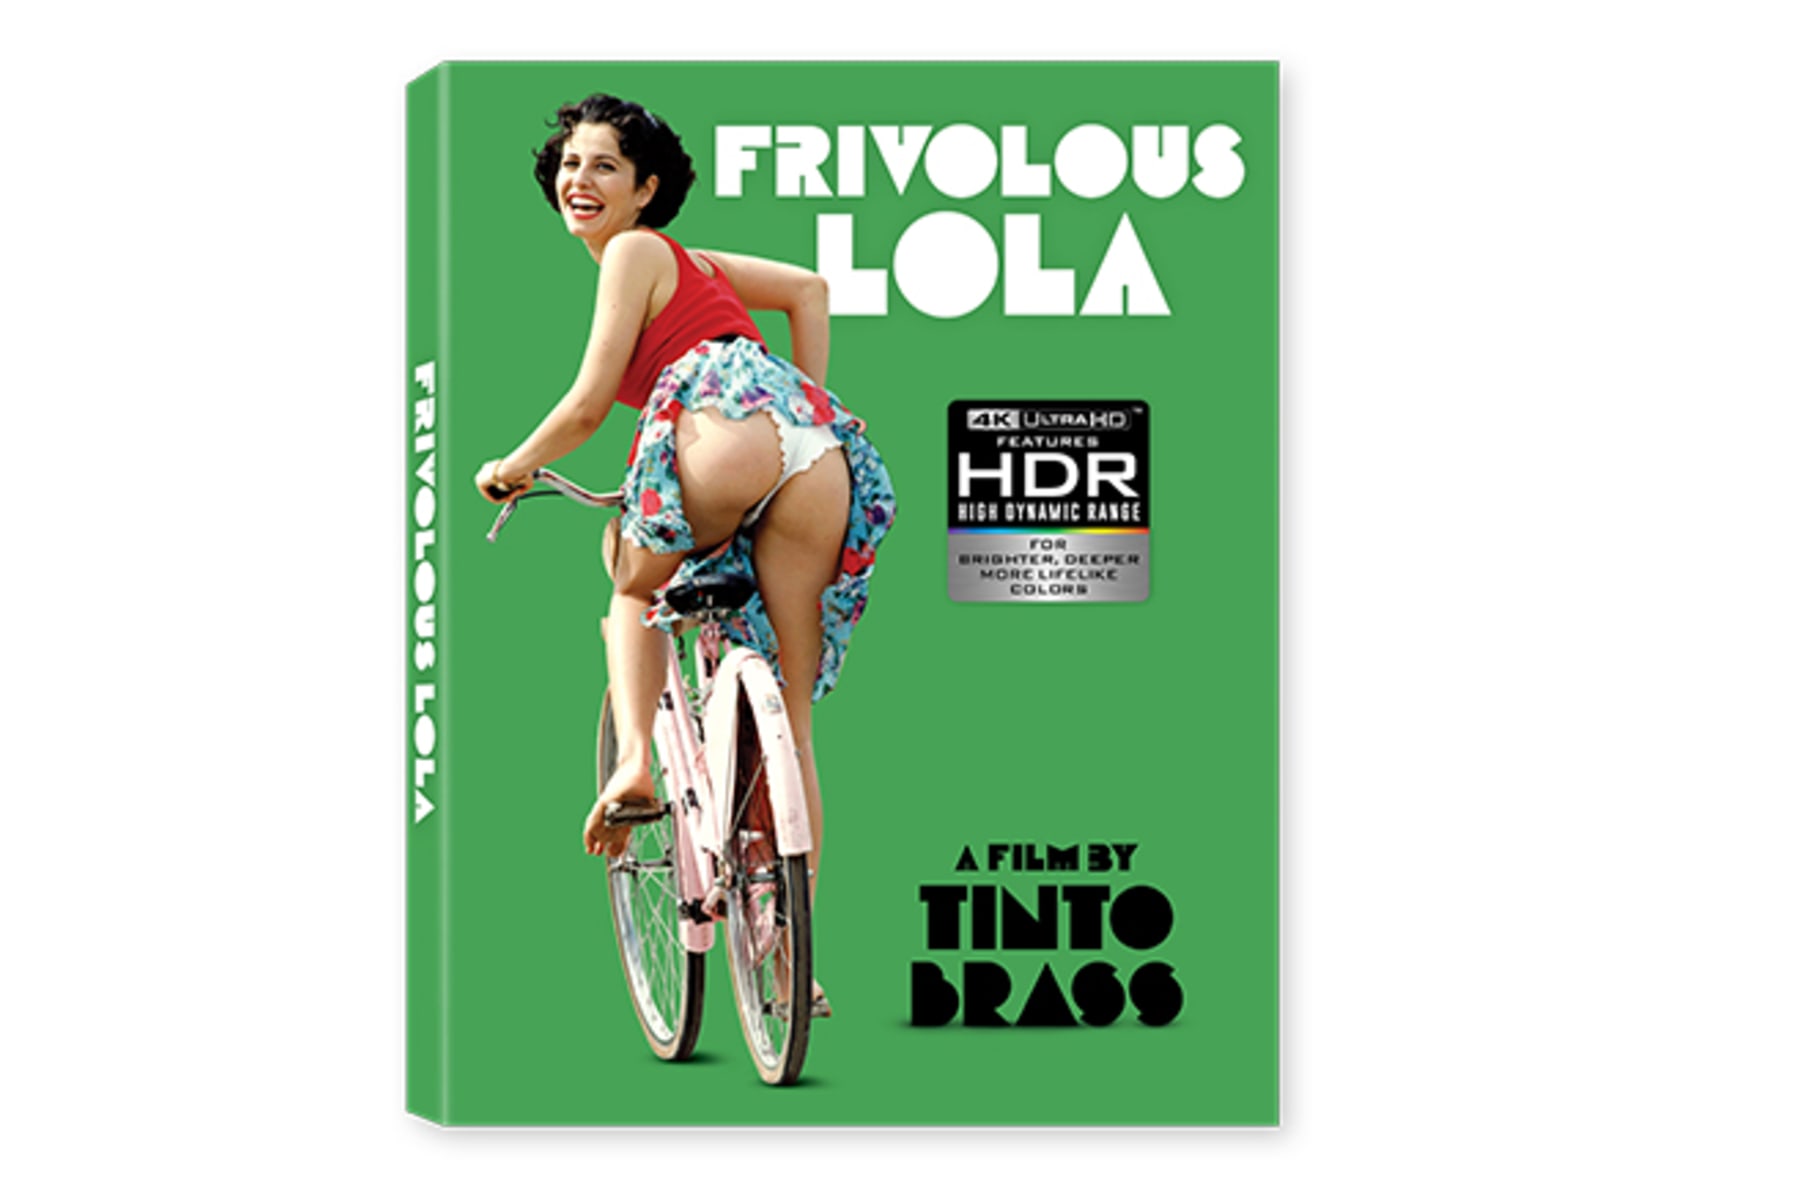 The Films of Tinto Brass HC Book and 4K UHD Indiegogo image